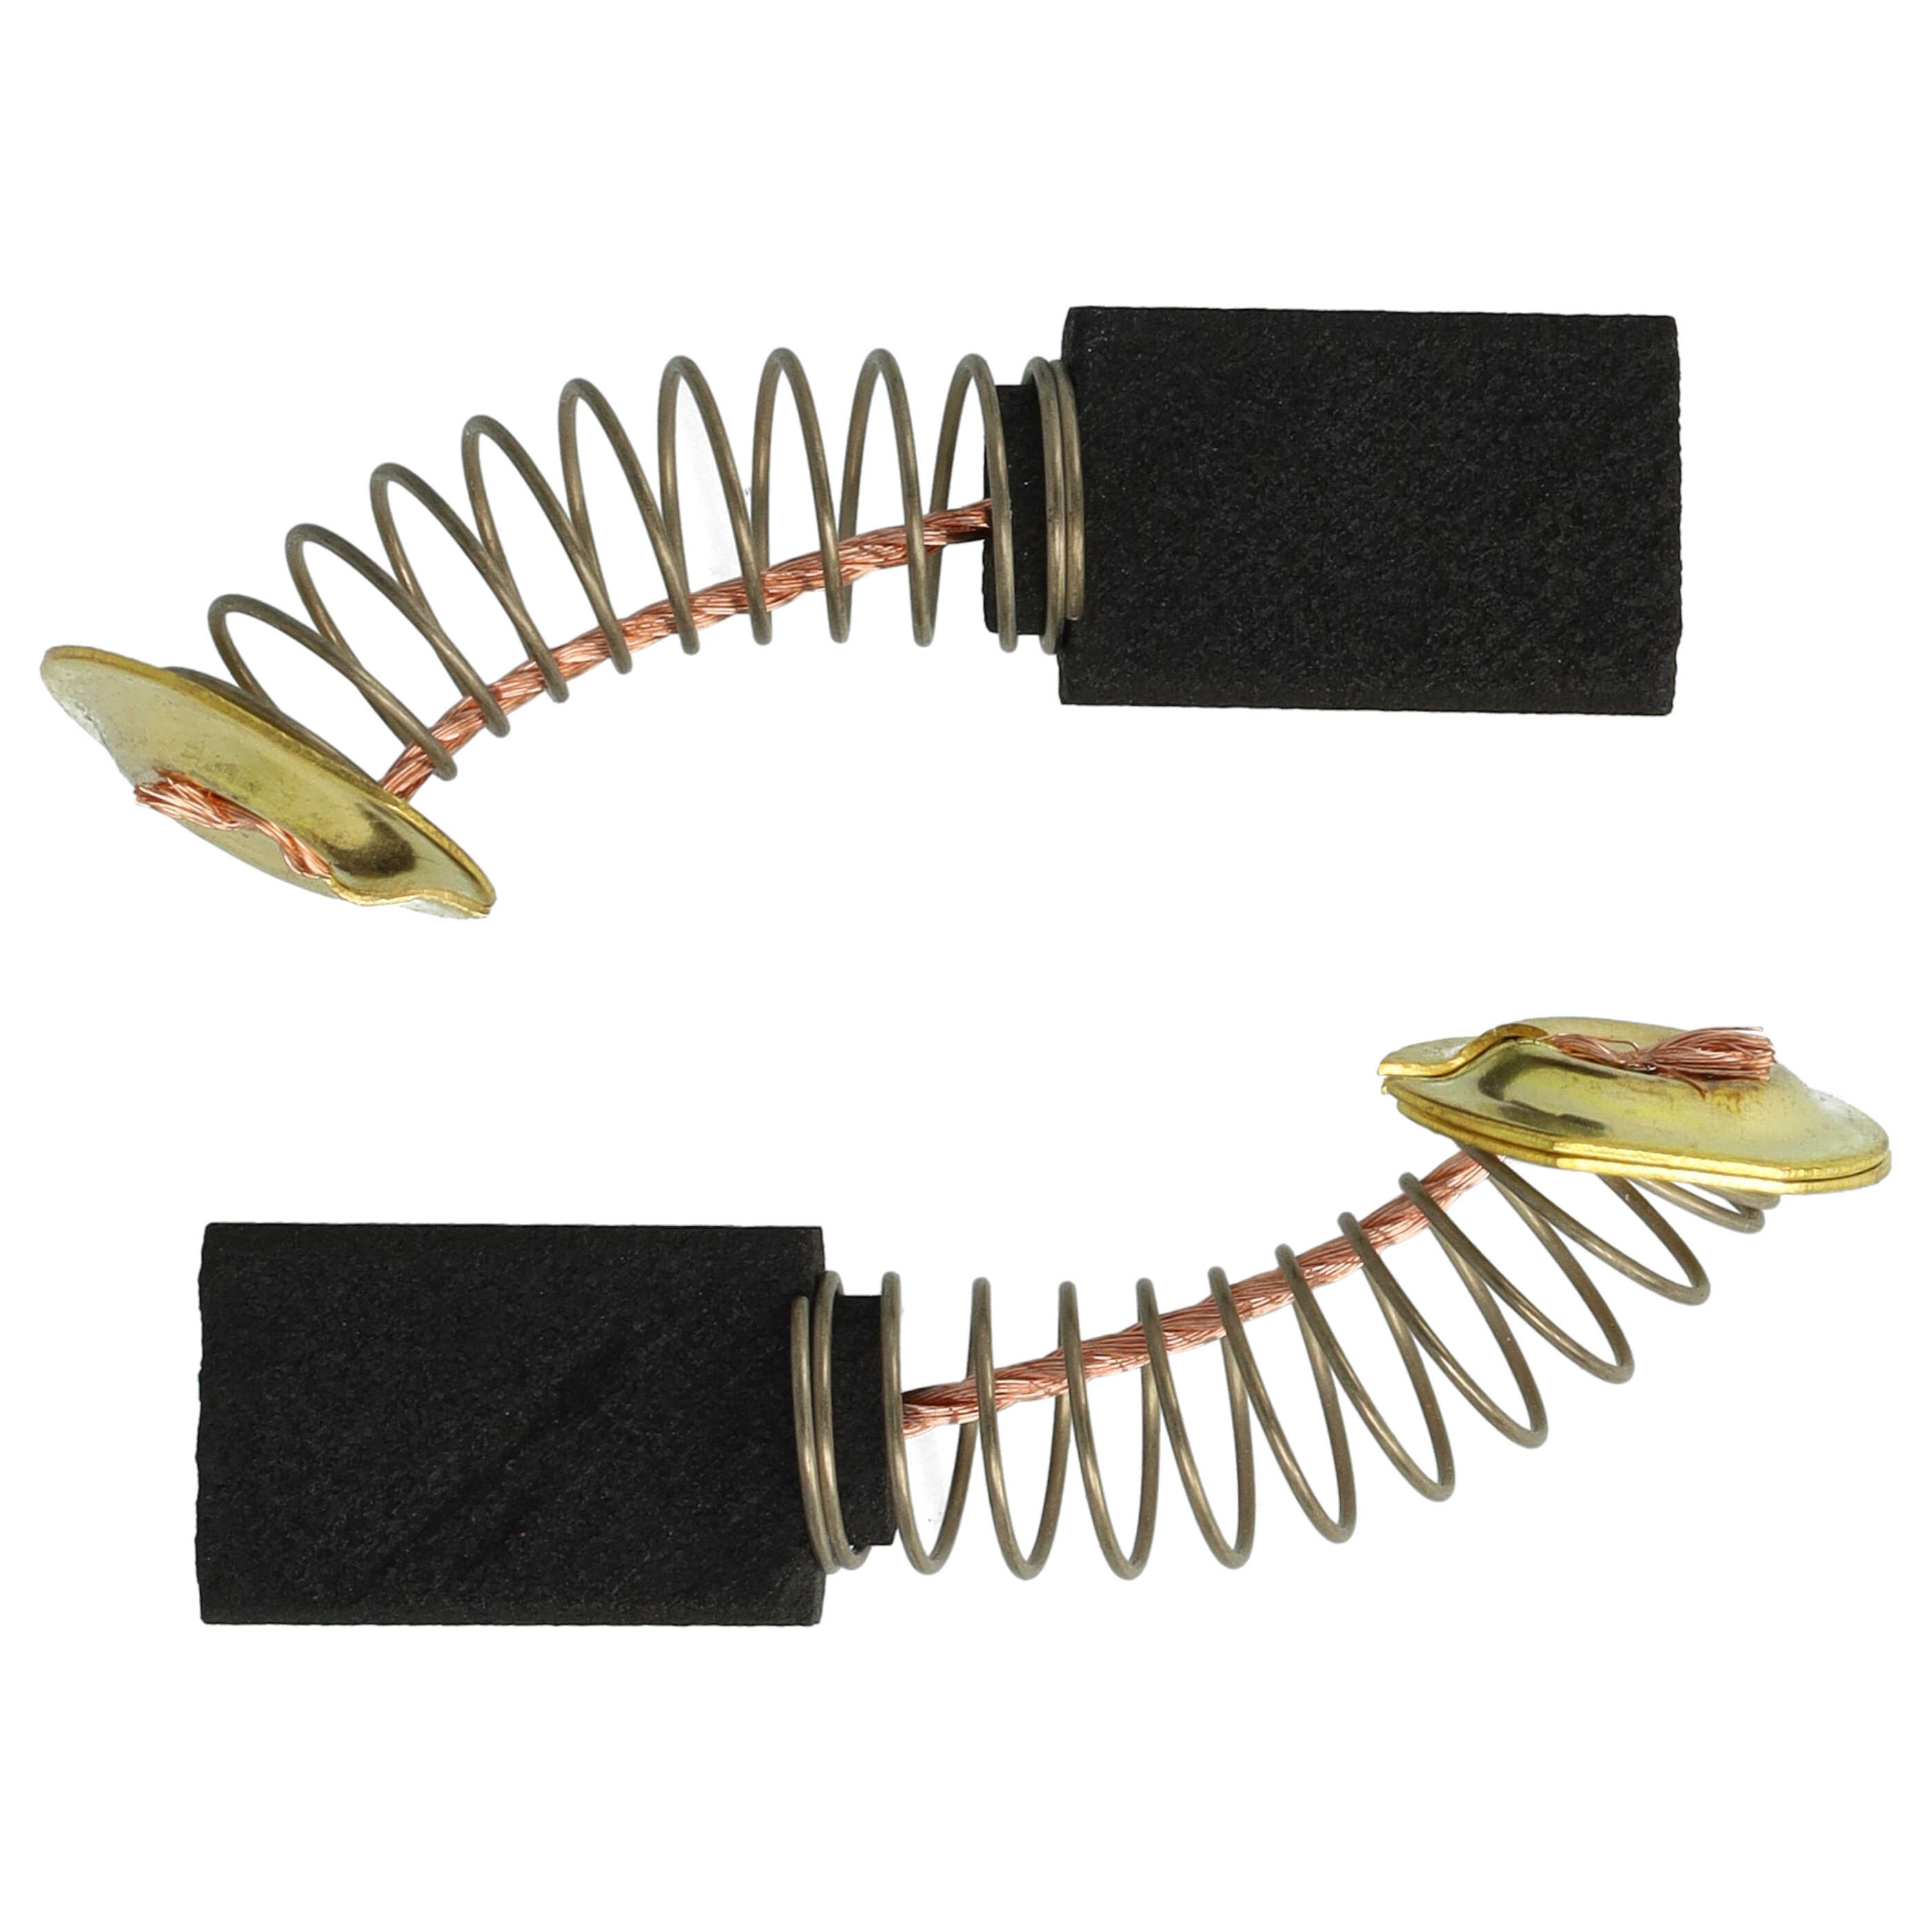 2x Carbon Brush as Replacement for Dolmar 957.802.410 Electric Power Tools + Spring, 19 x 11 x 5mm